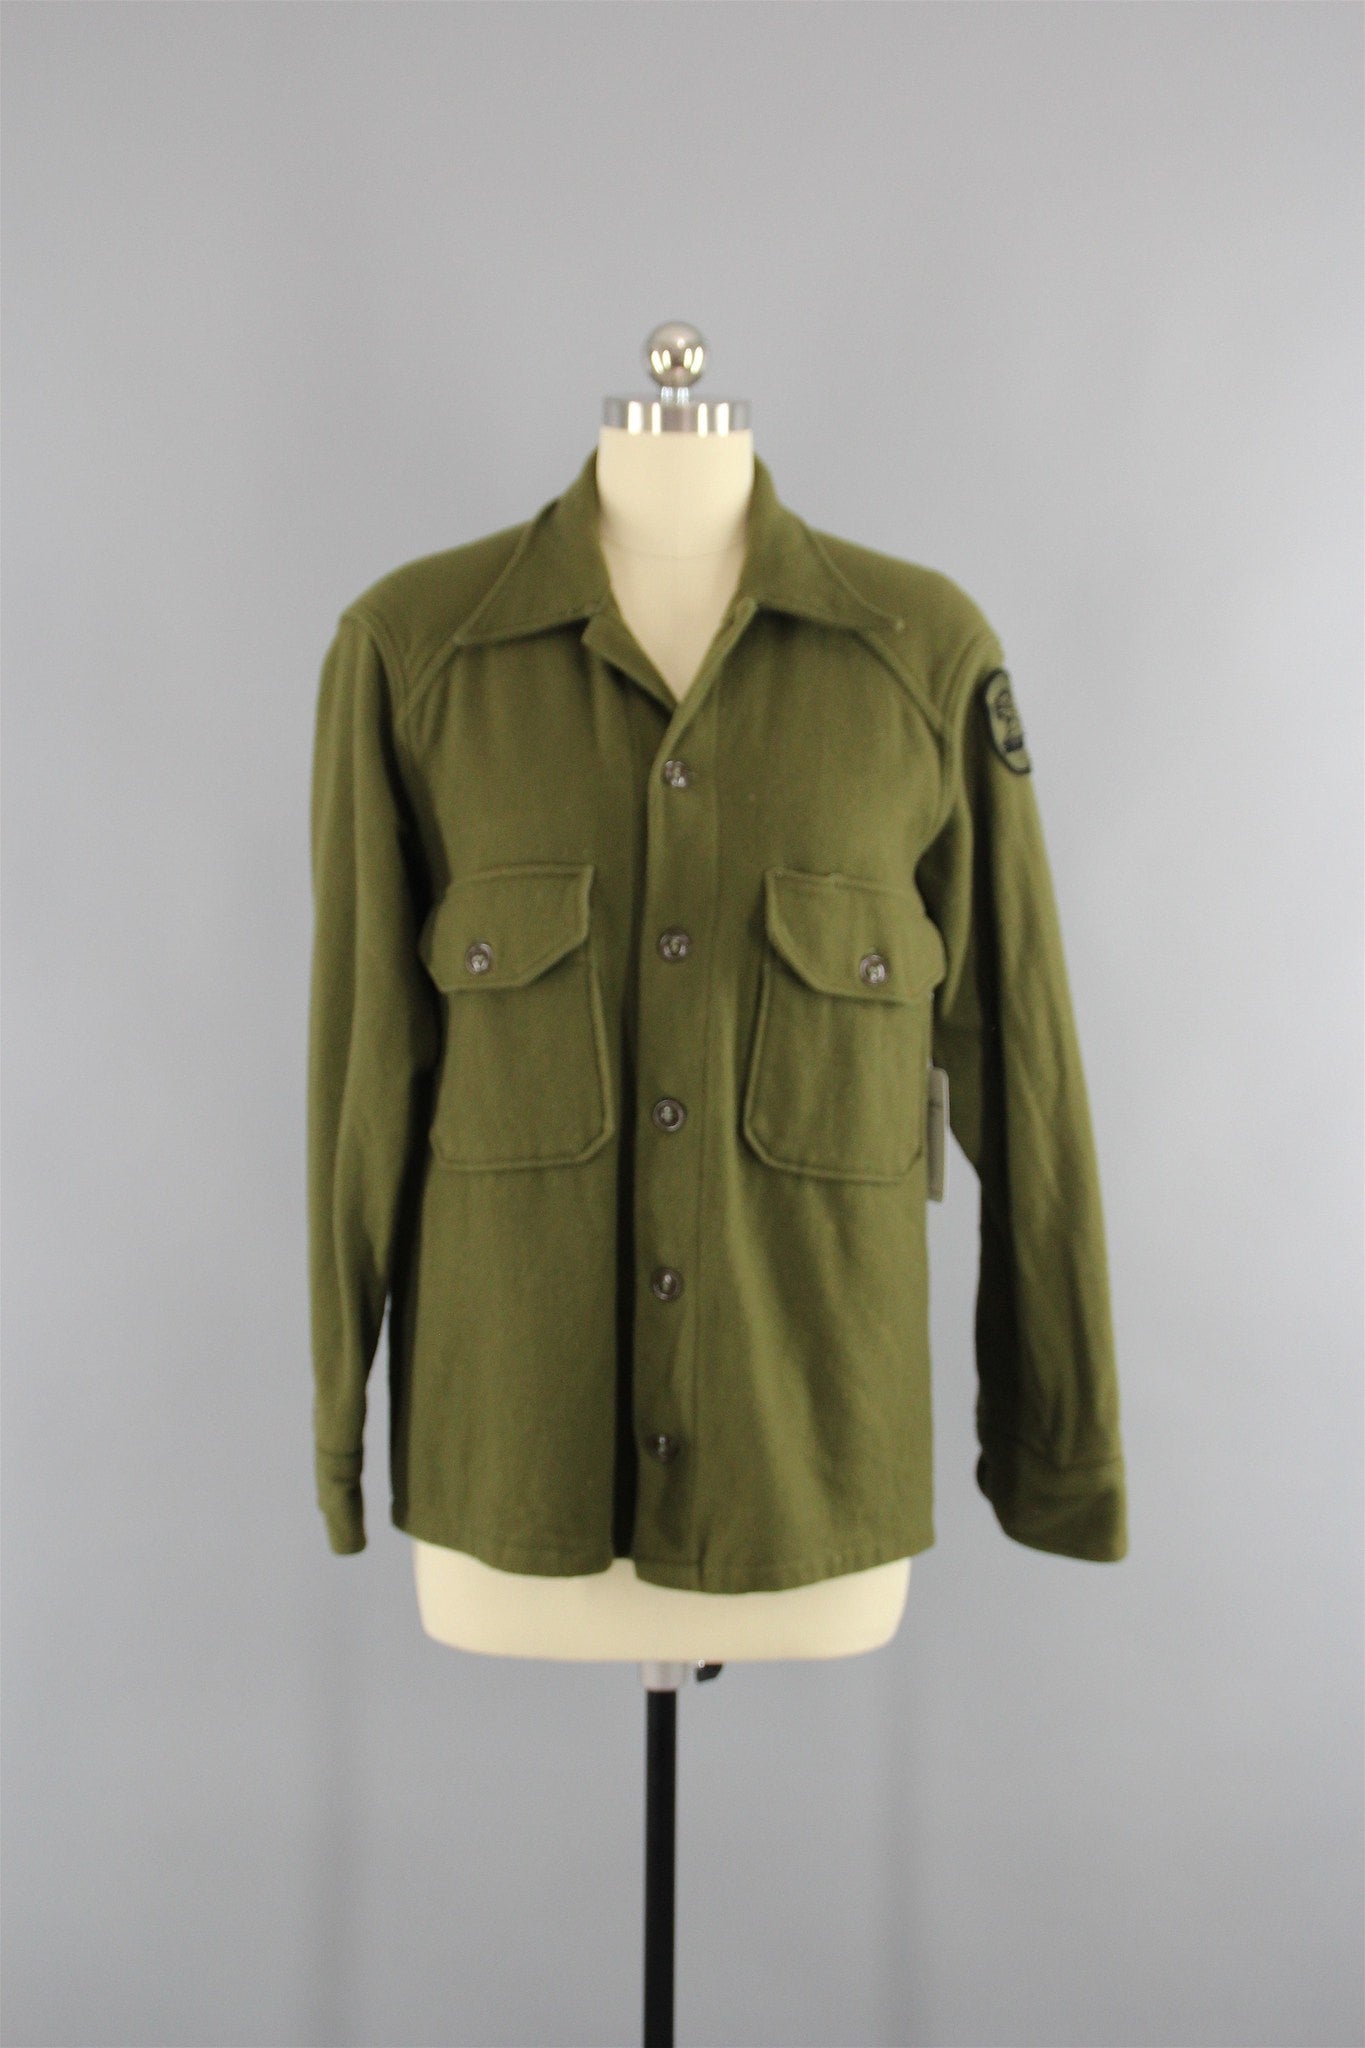 Vintage 1950s US Army Olive Drab Green Field Shirt Jacket - ThisBlueBird